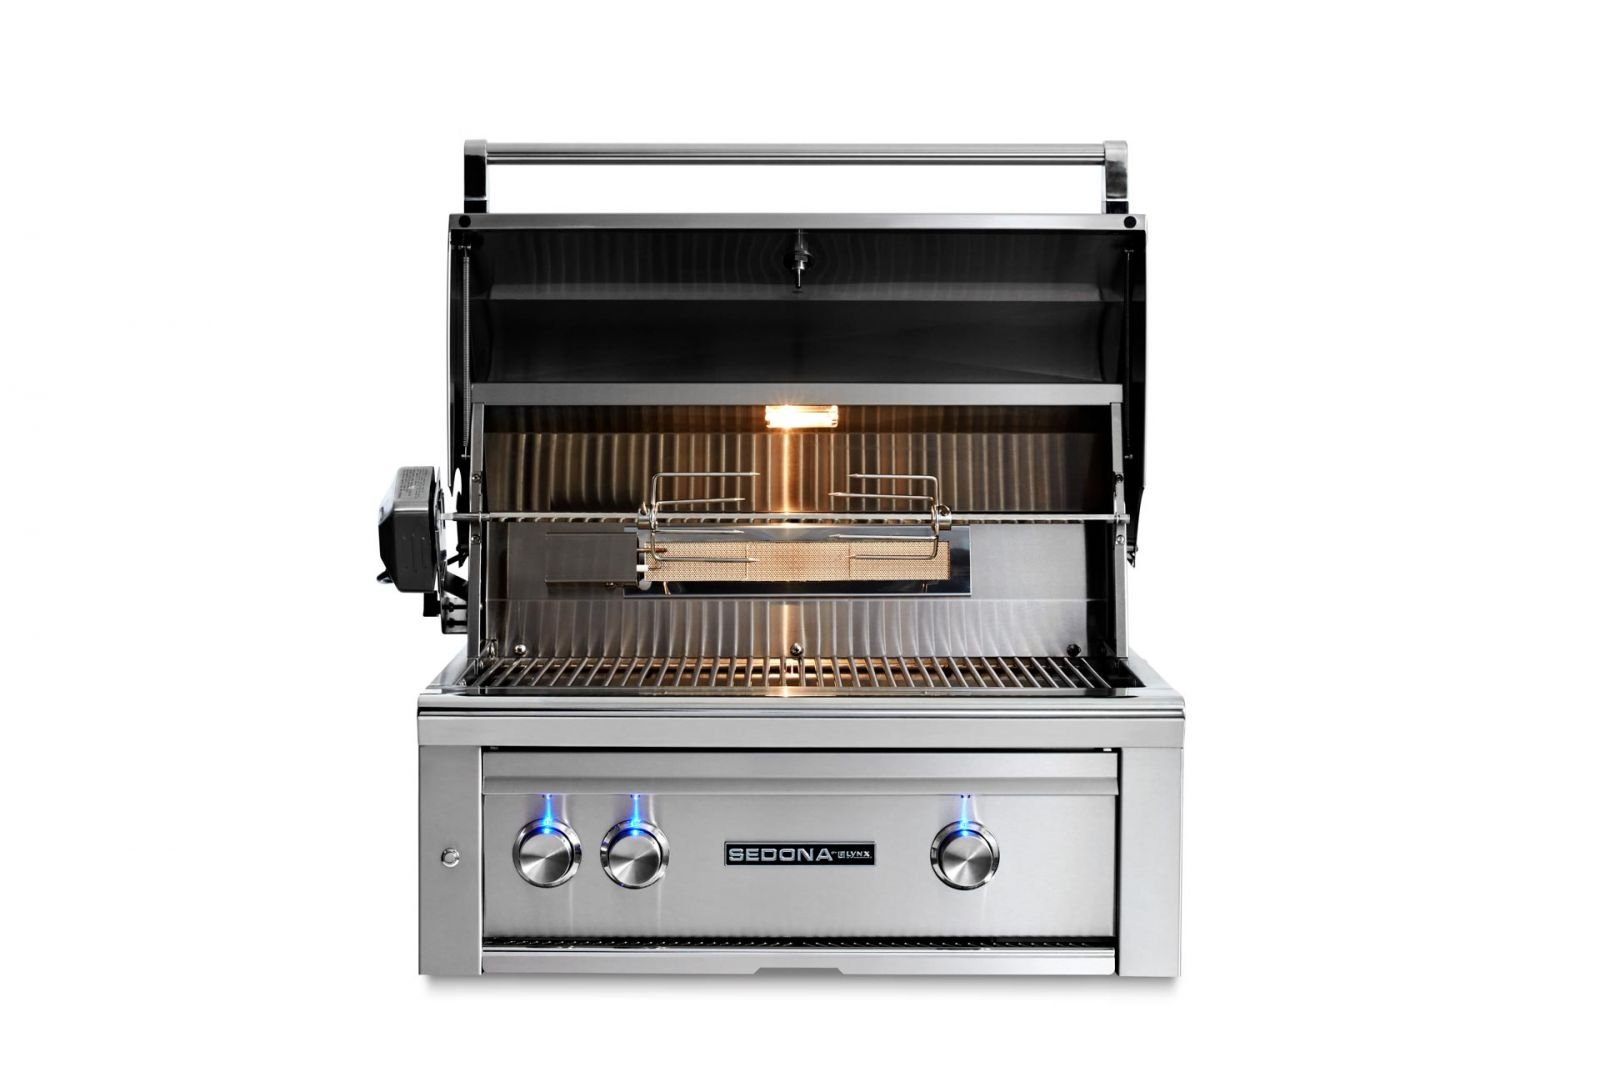 30" Built-in Grill with 2 Stainless Steel Burners and Rotisserie (500R)